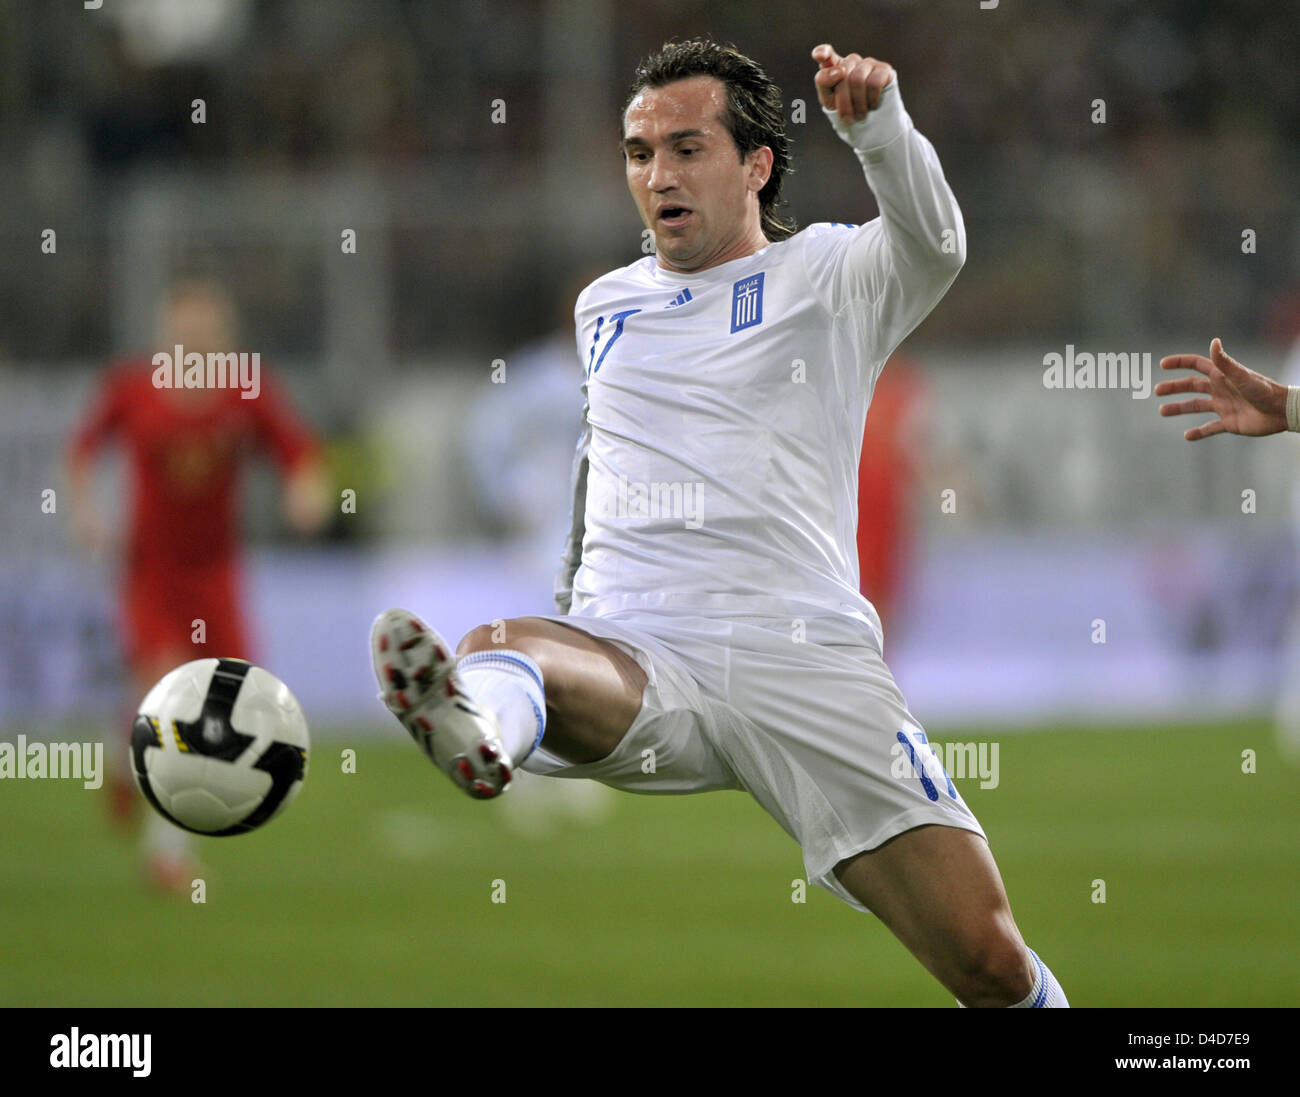 Greece's striker Theofanis Gekas volley-shoots the ball in the test cap Portugal v Greece at LTU Arena stadium in Duesseldorf, Germany, 26 March 2008. Greece defeated Portugal 2-1. Photo: Achim Scheidemann Stock Photo